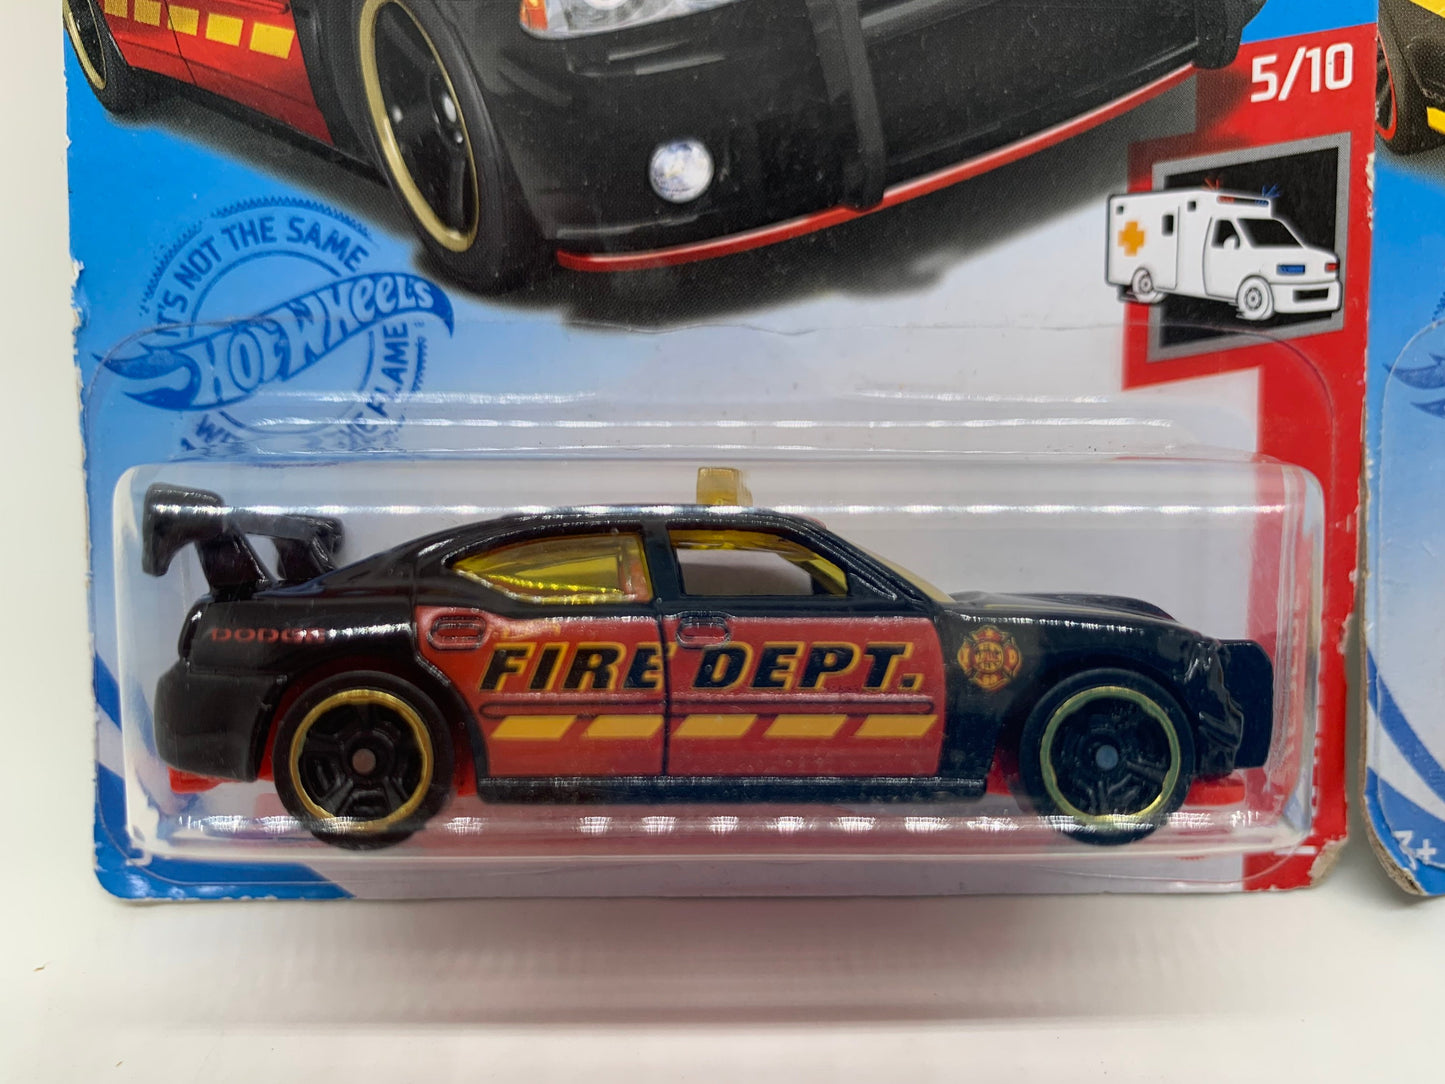 Hot Wheels Dodge Charger SRT Drift Fire Dept Black and Yellow HW Rescue Collectable Miniature Scale Model Toy Car Perfect Birthday Gift